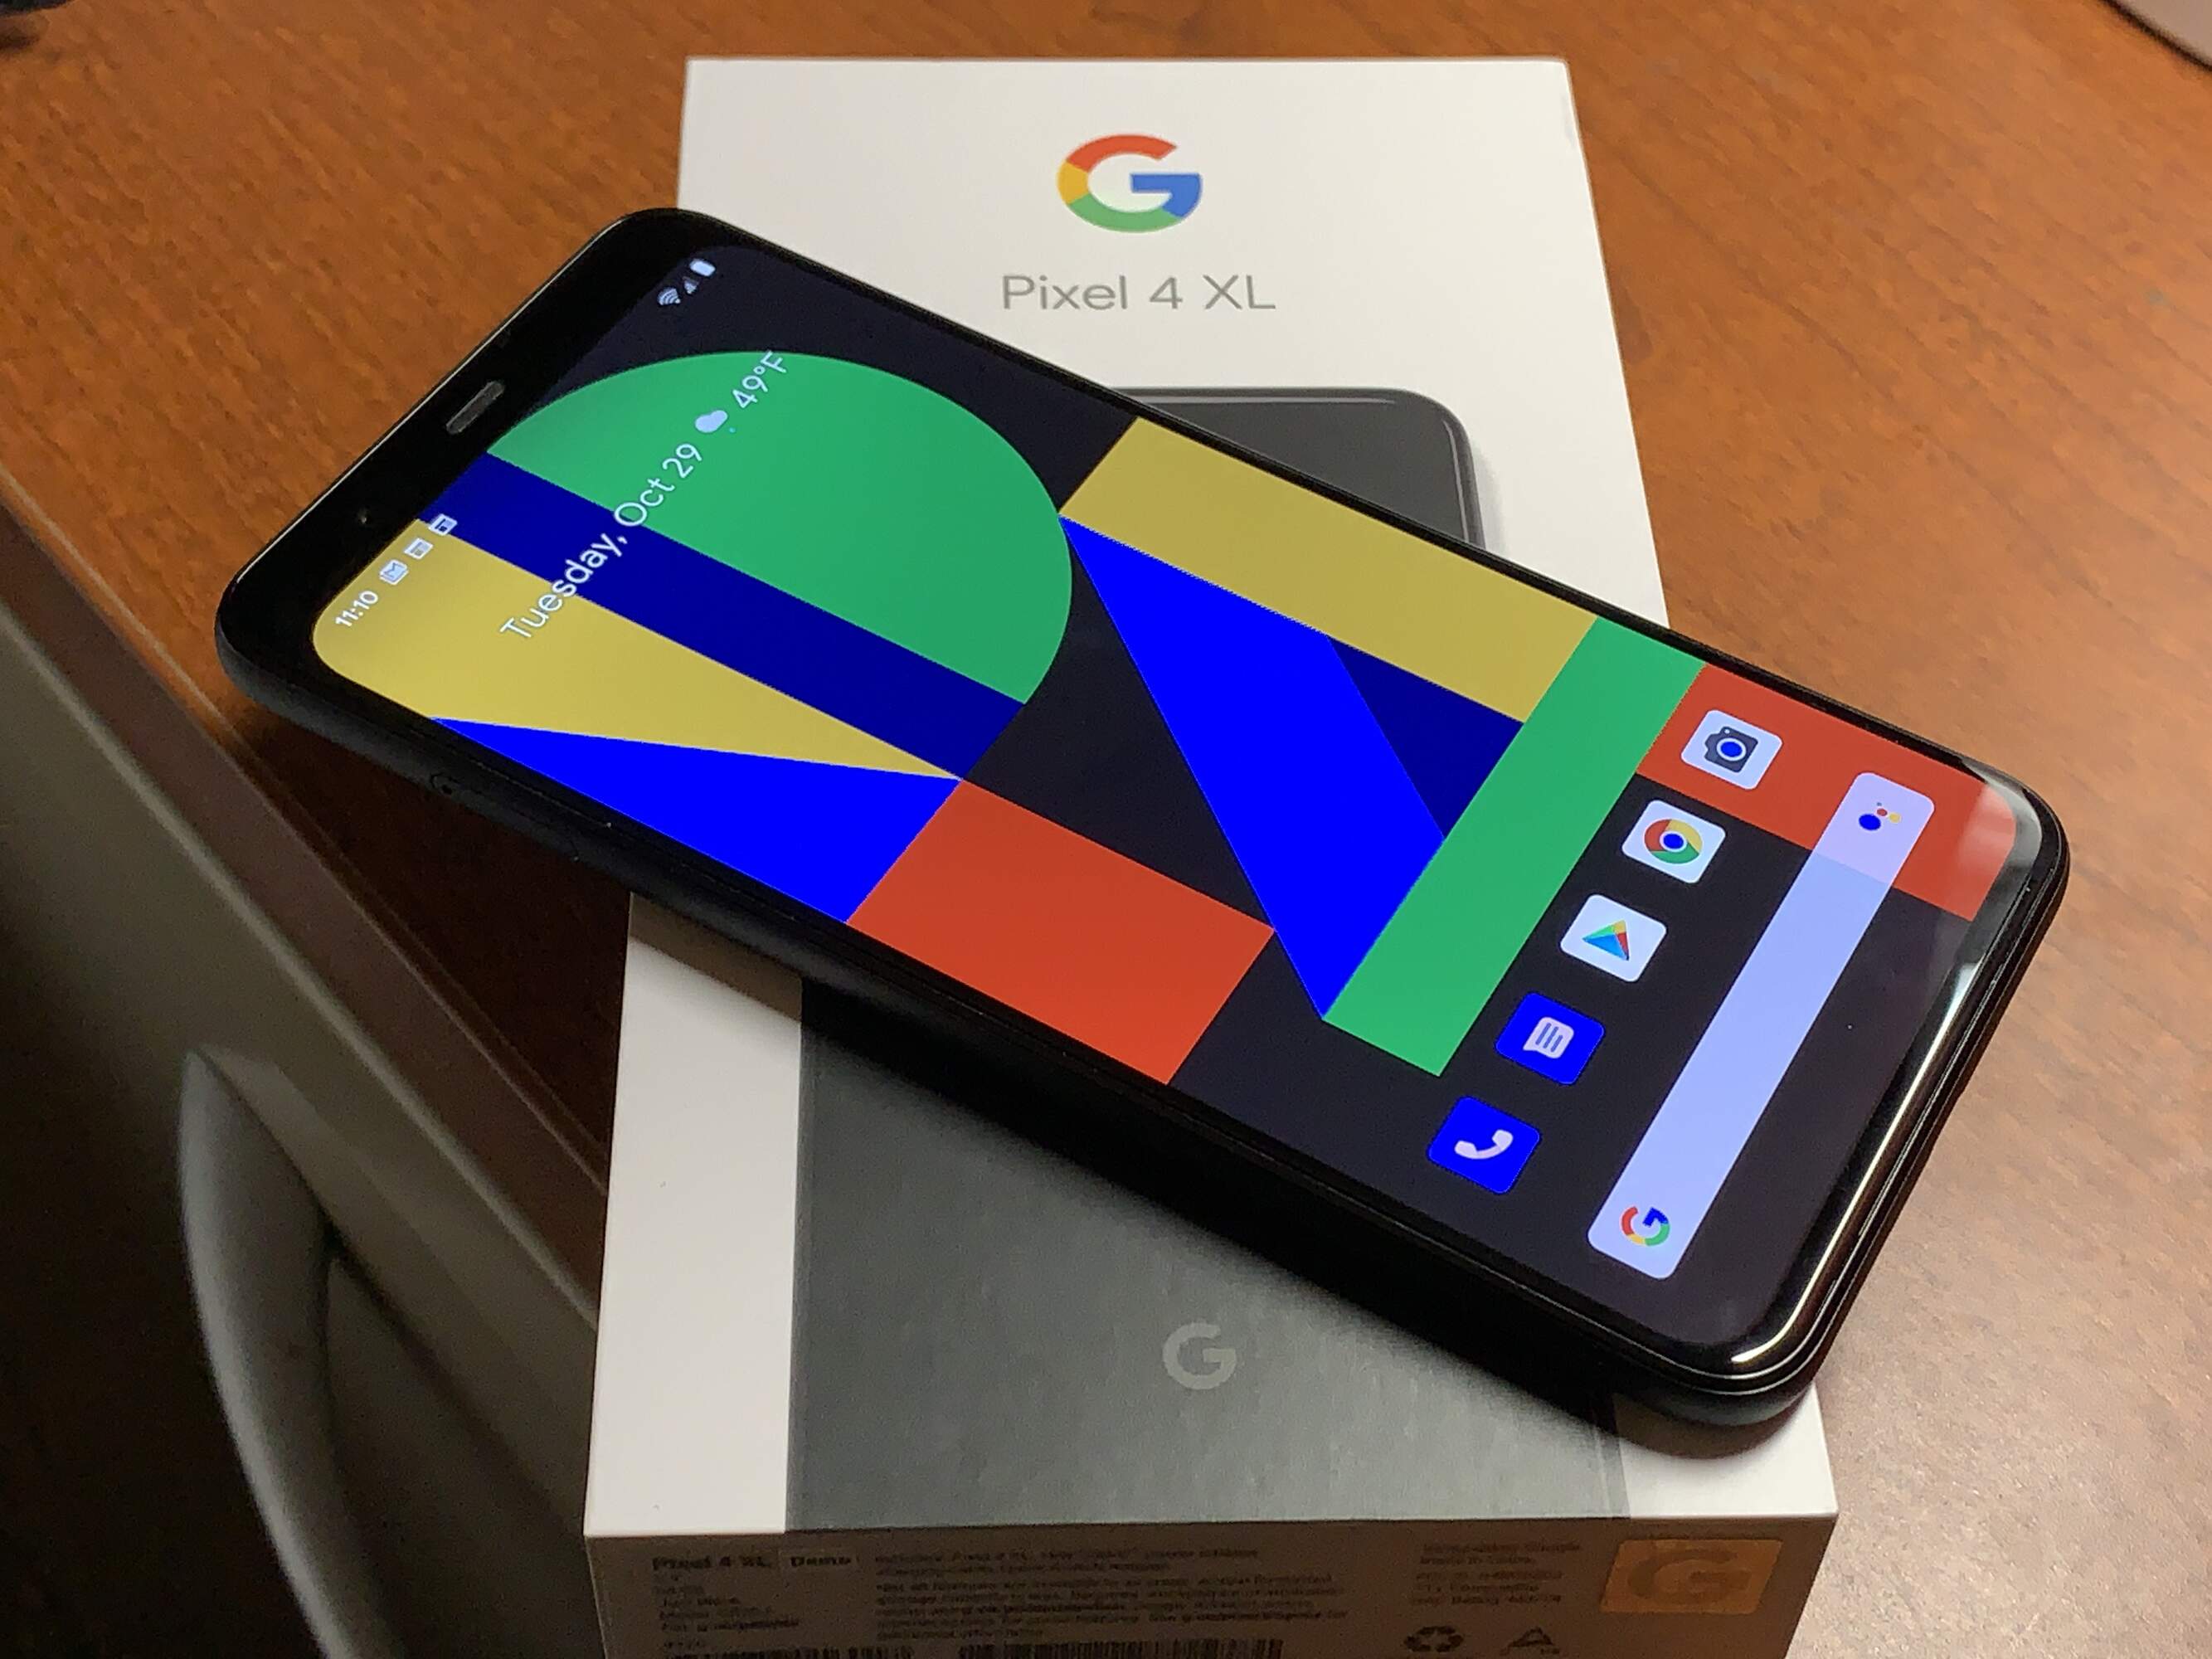 Anticipating Arrival: Google Pixel 4 Shipping Schedule